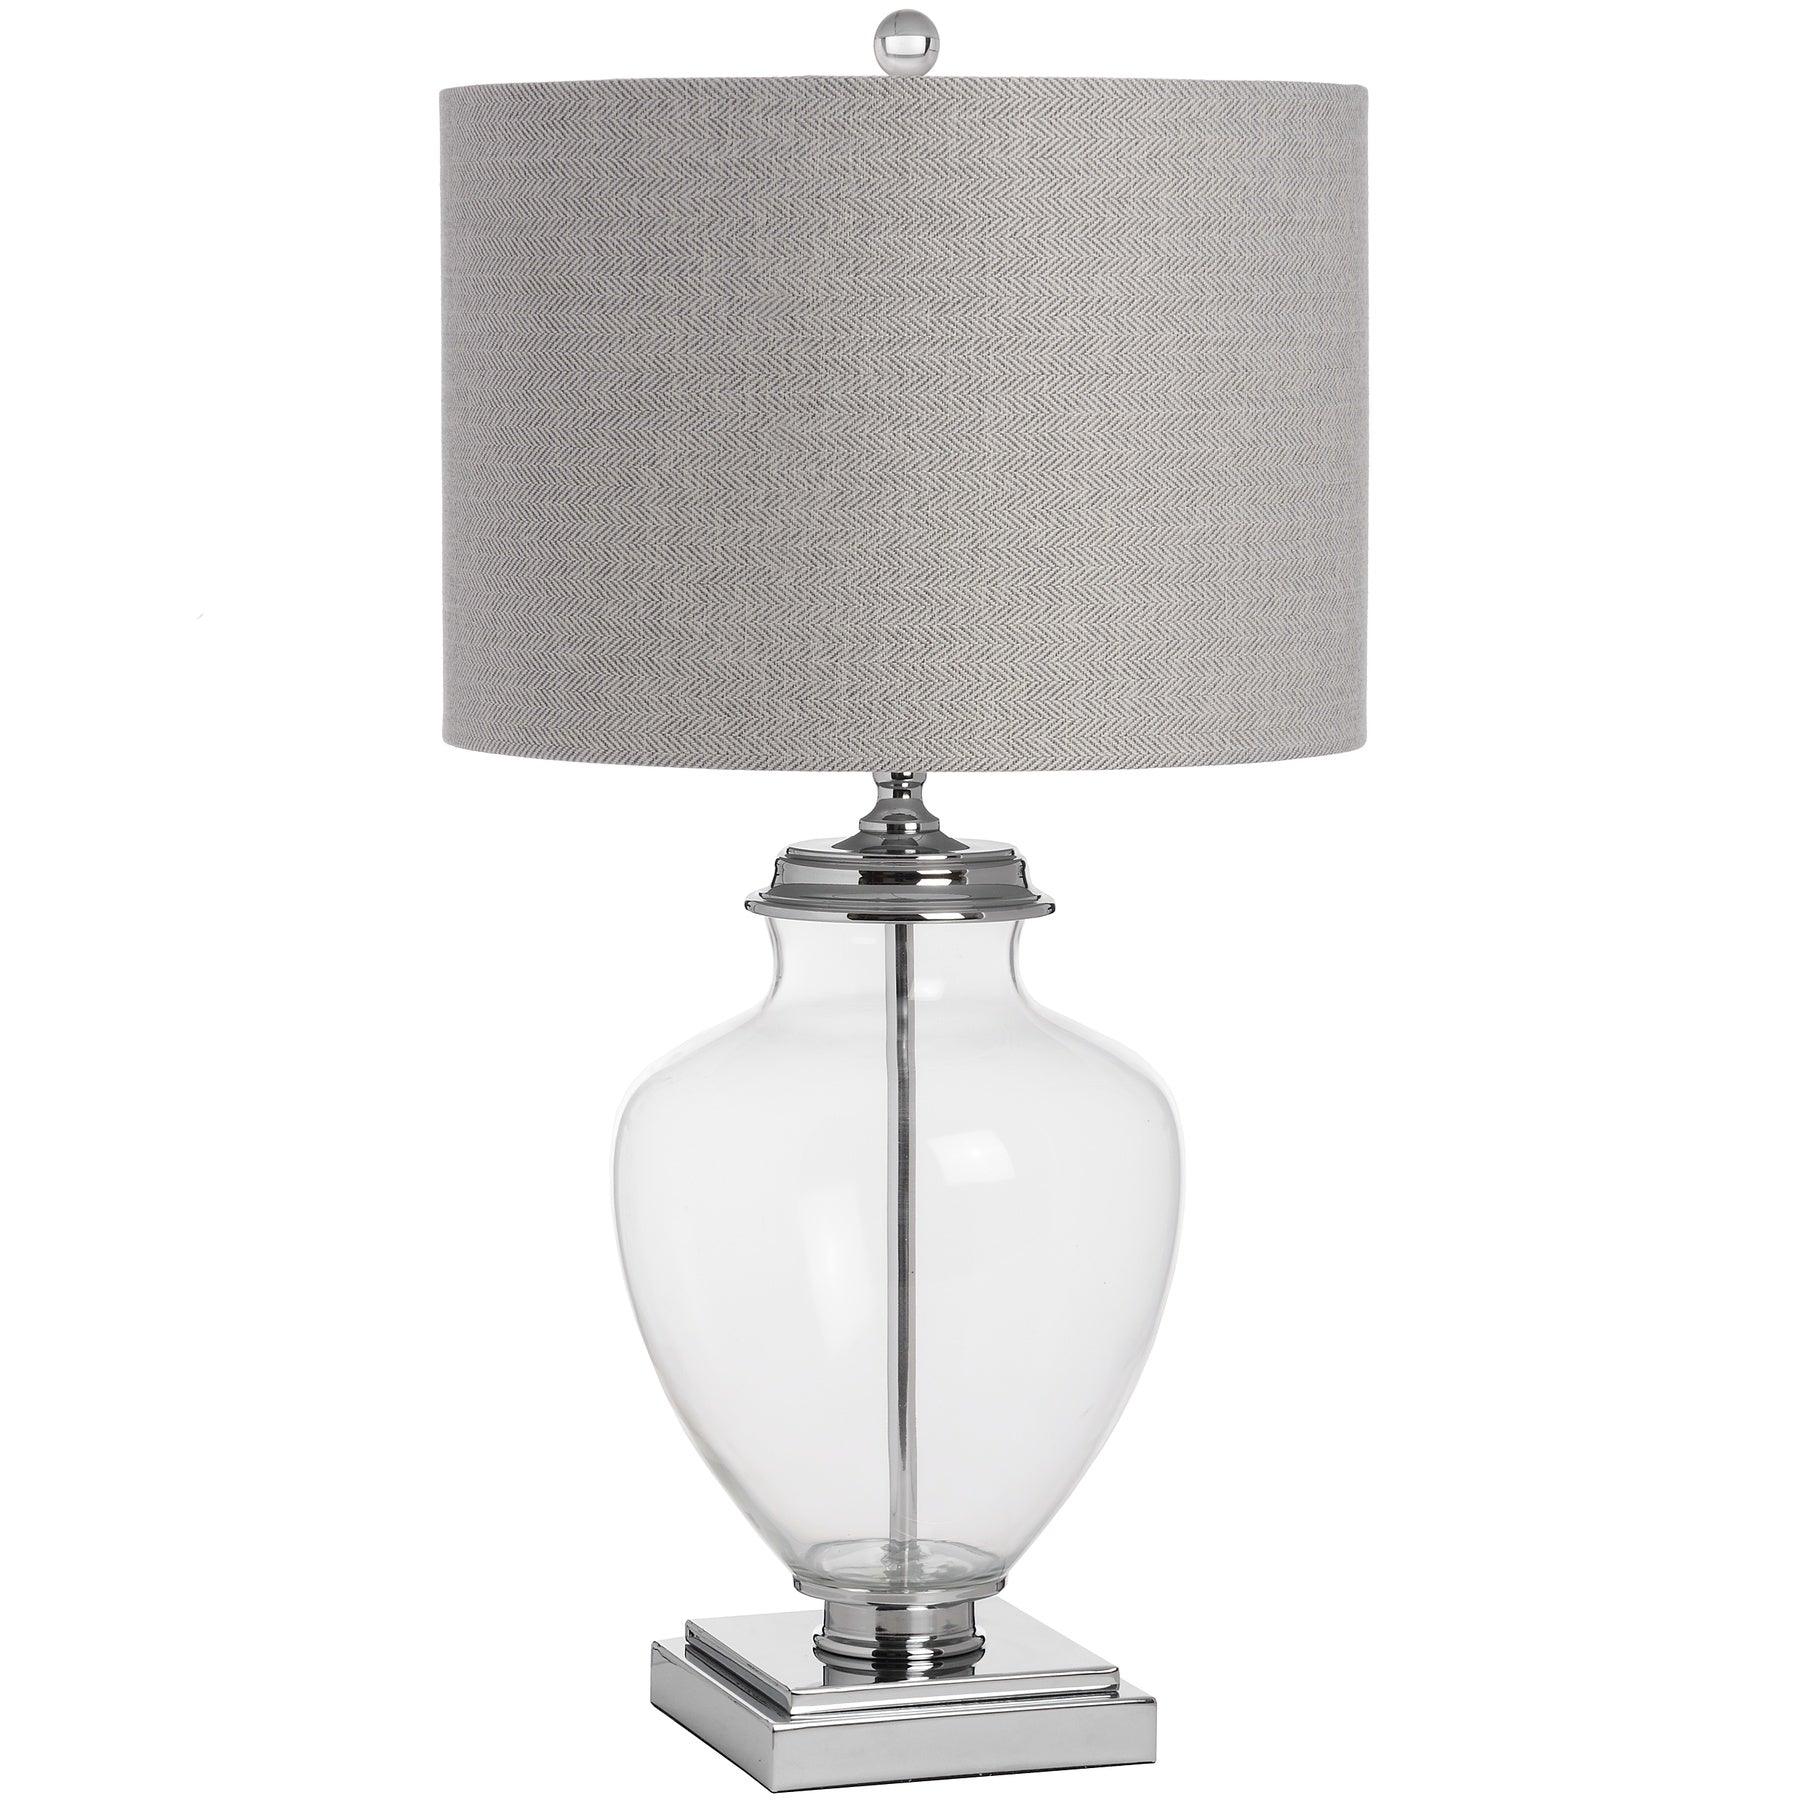 View Perugia Glass Table lamp information